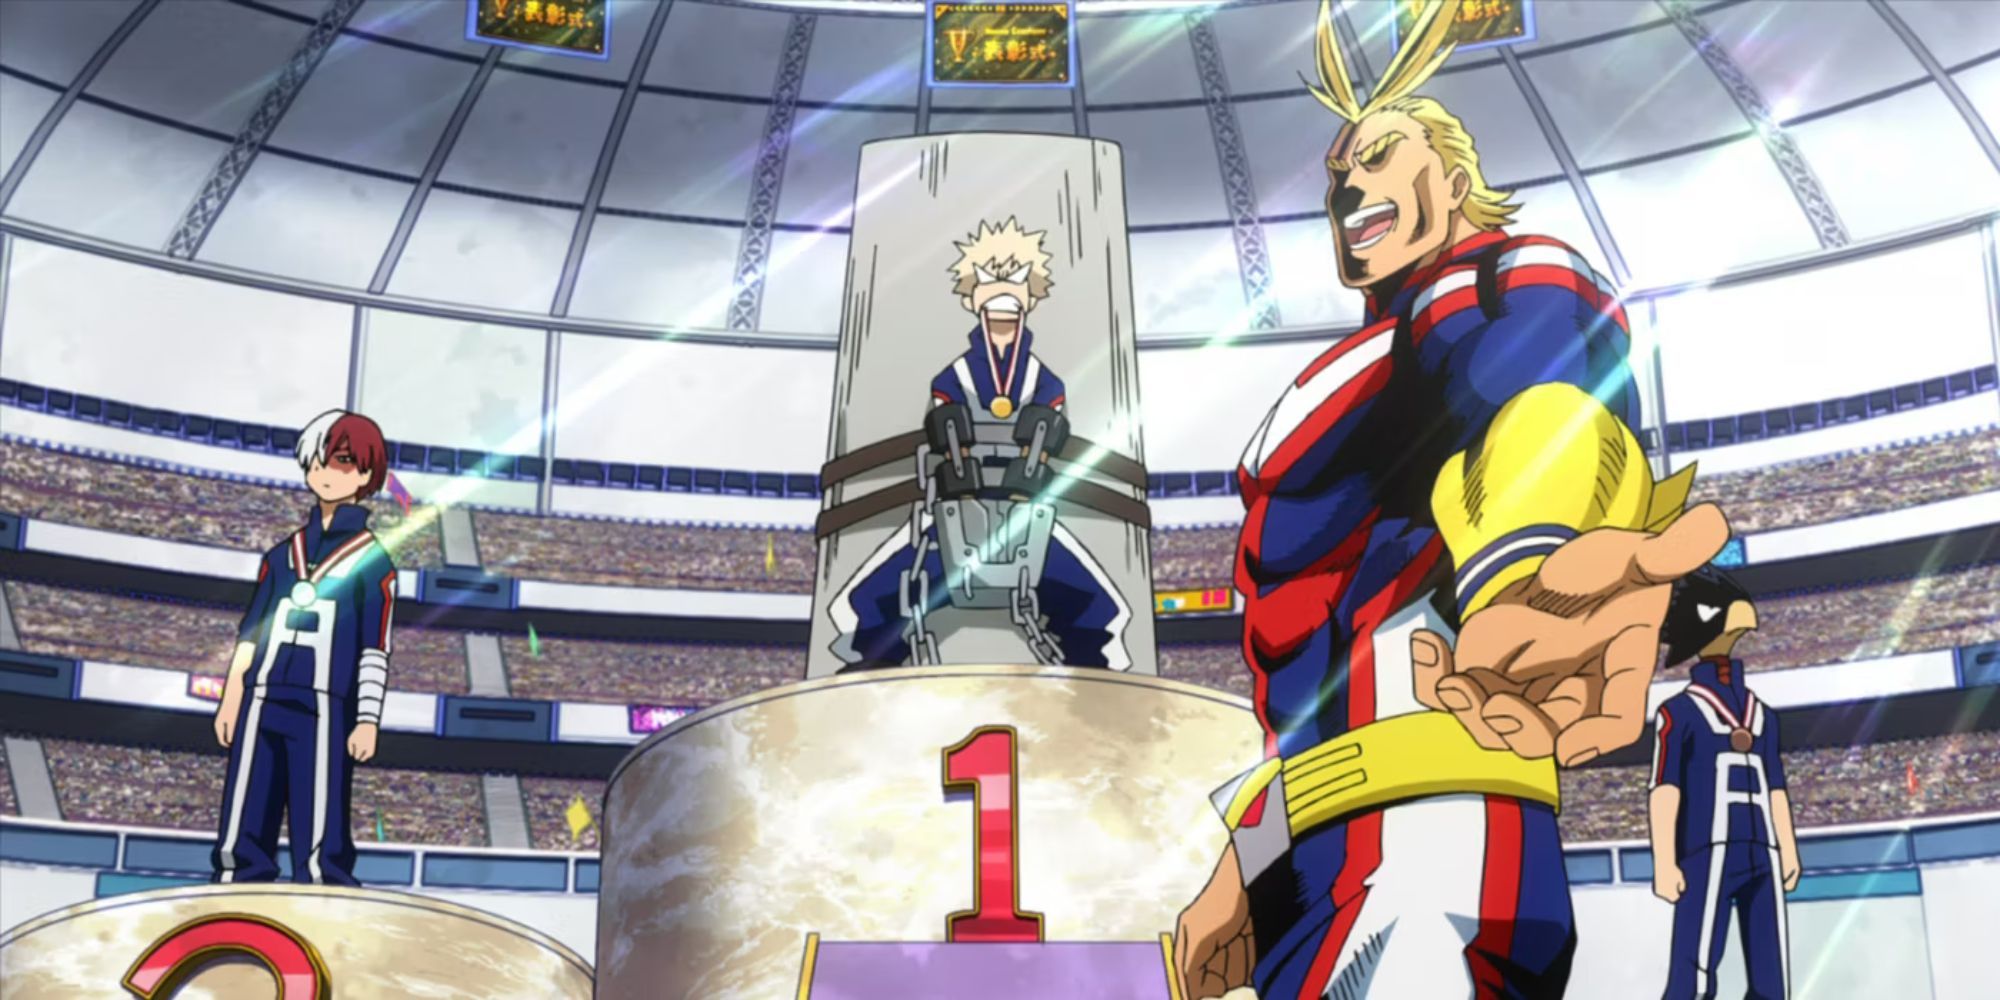 All Might awards the winners of the Sports Festival, Tokoyami in 3rd place, Todoroki in 2nd place and Bakugo in 1st place.